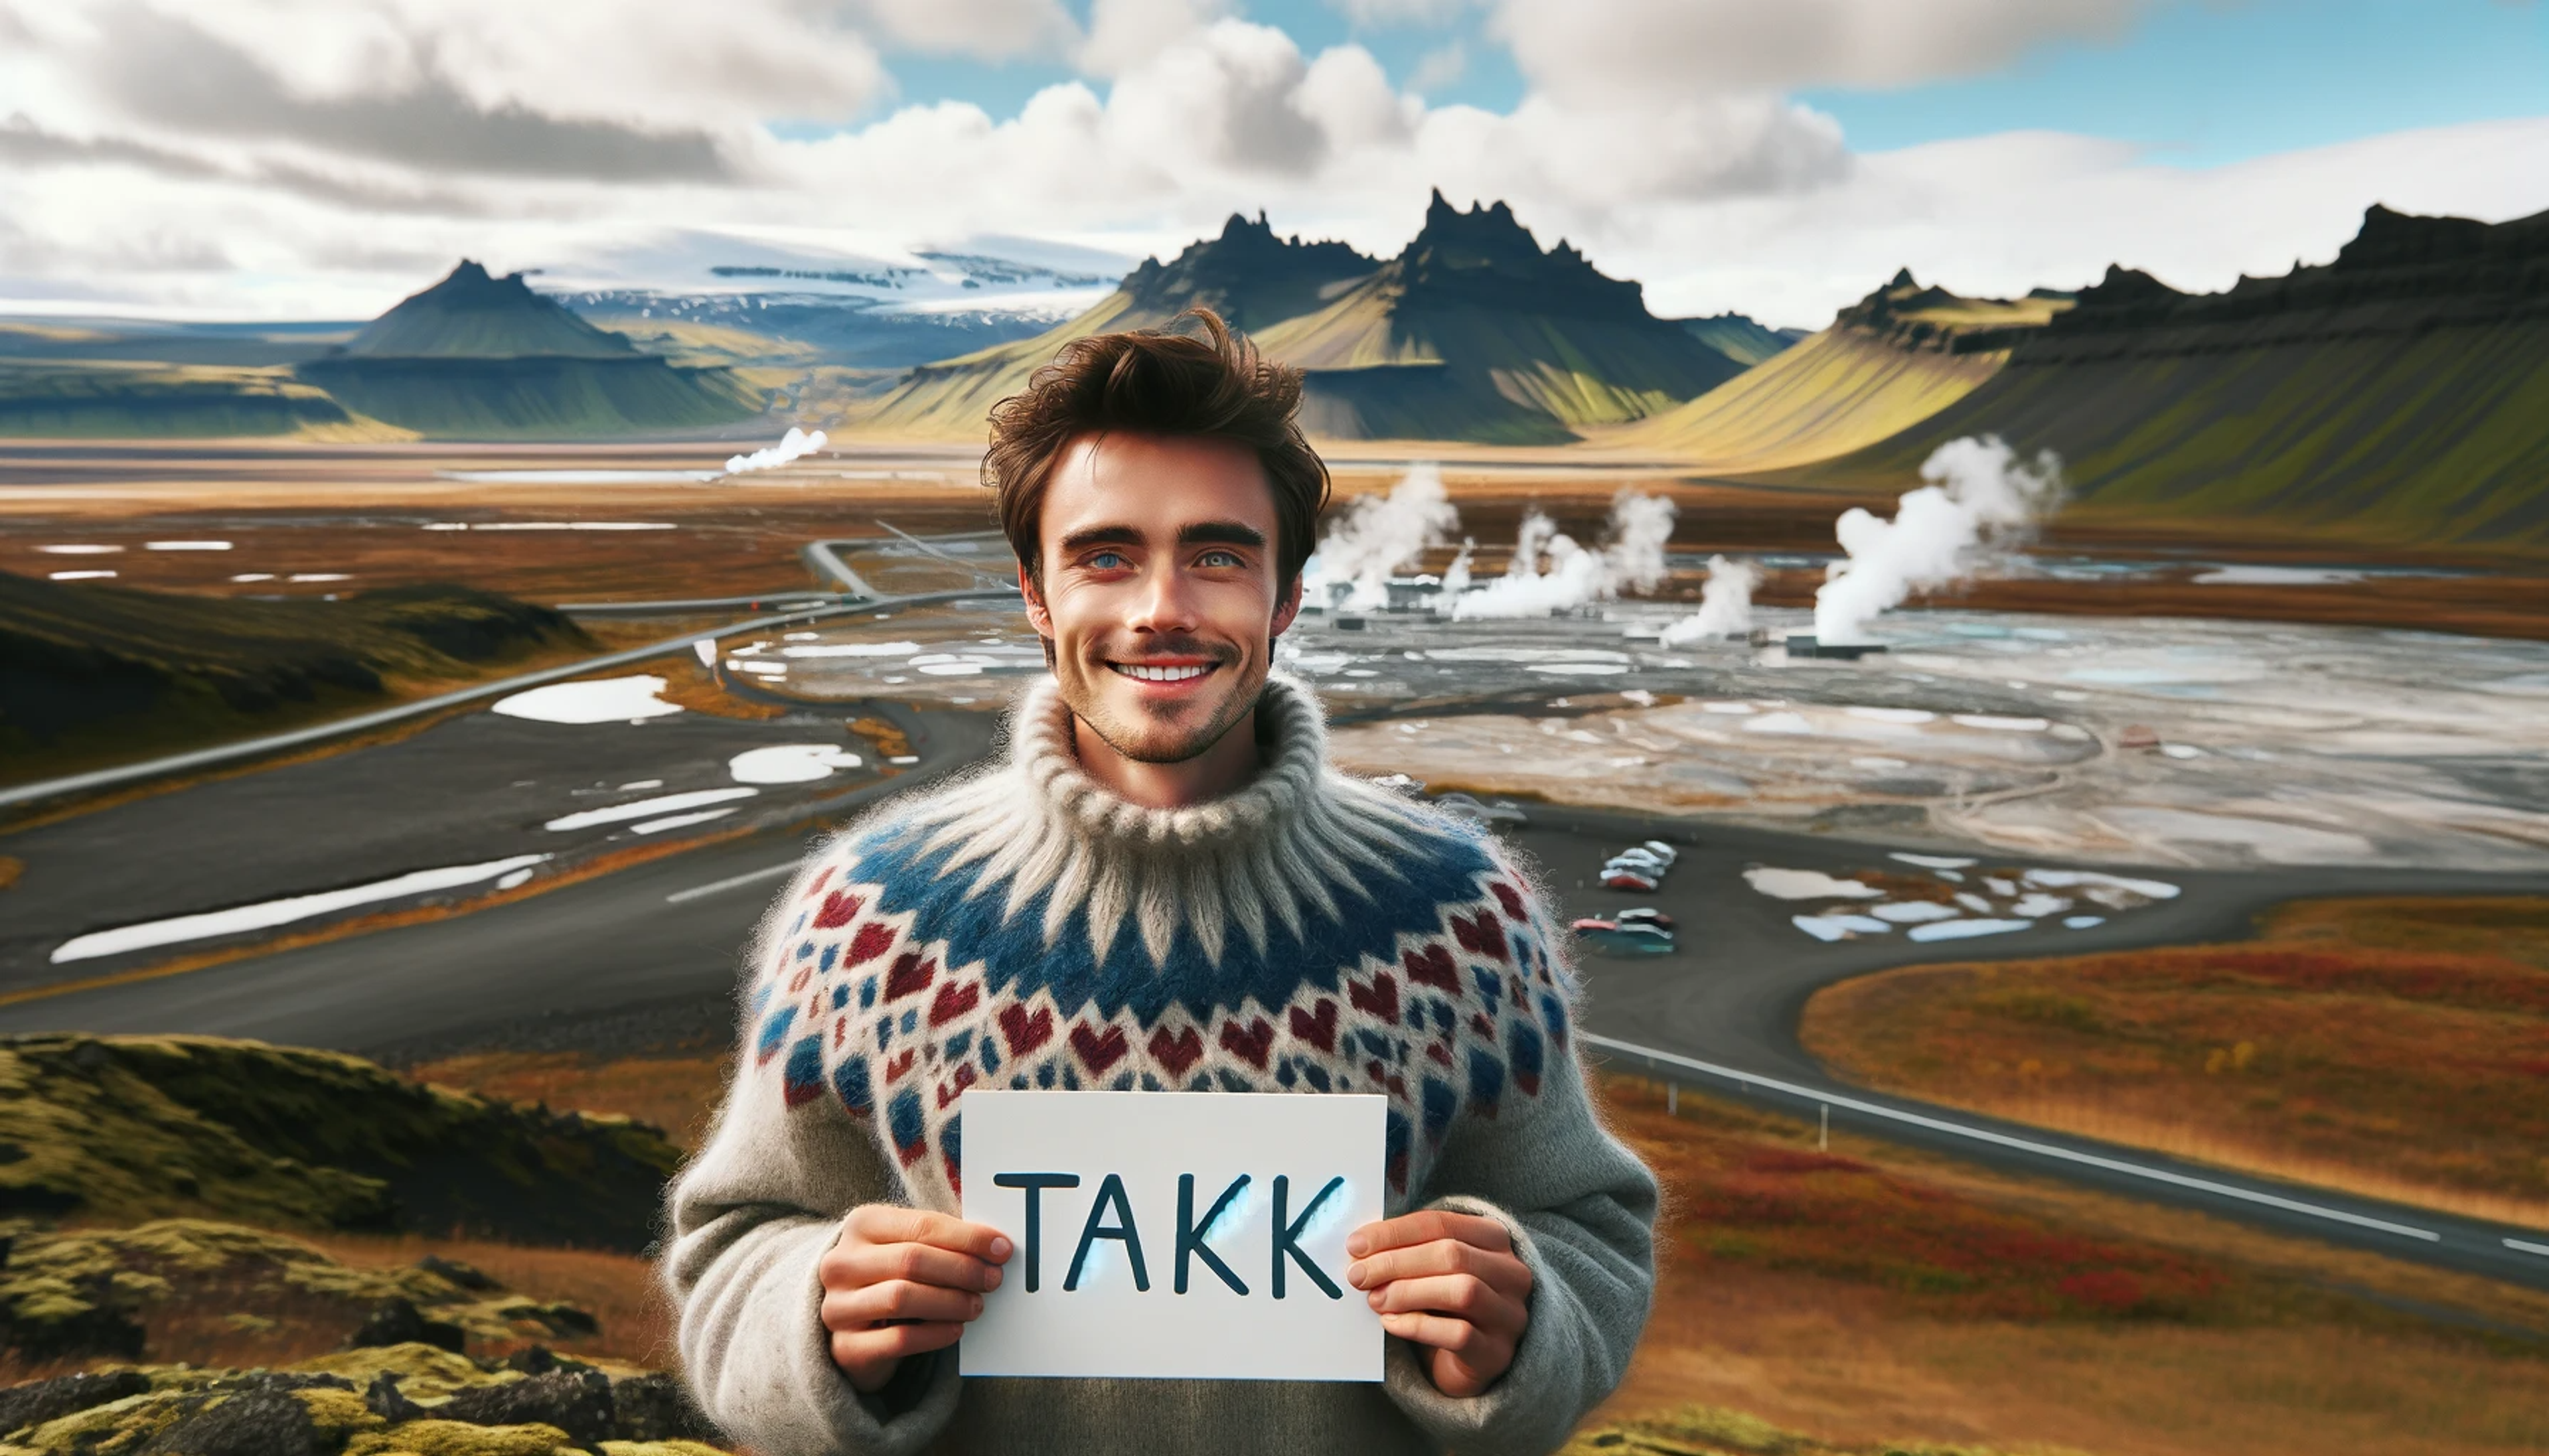 A person holding a sign in iceland that says "takk"